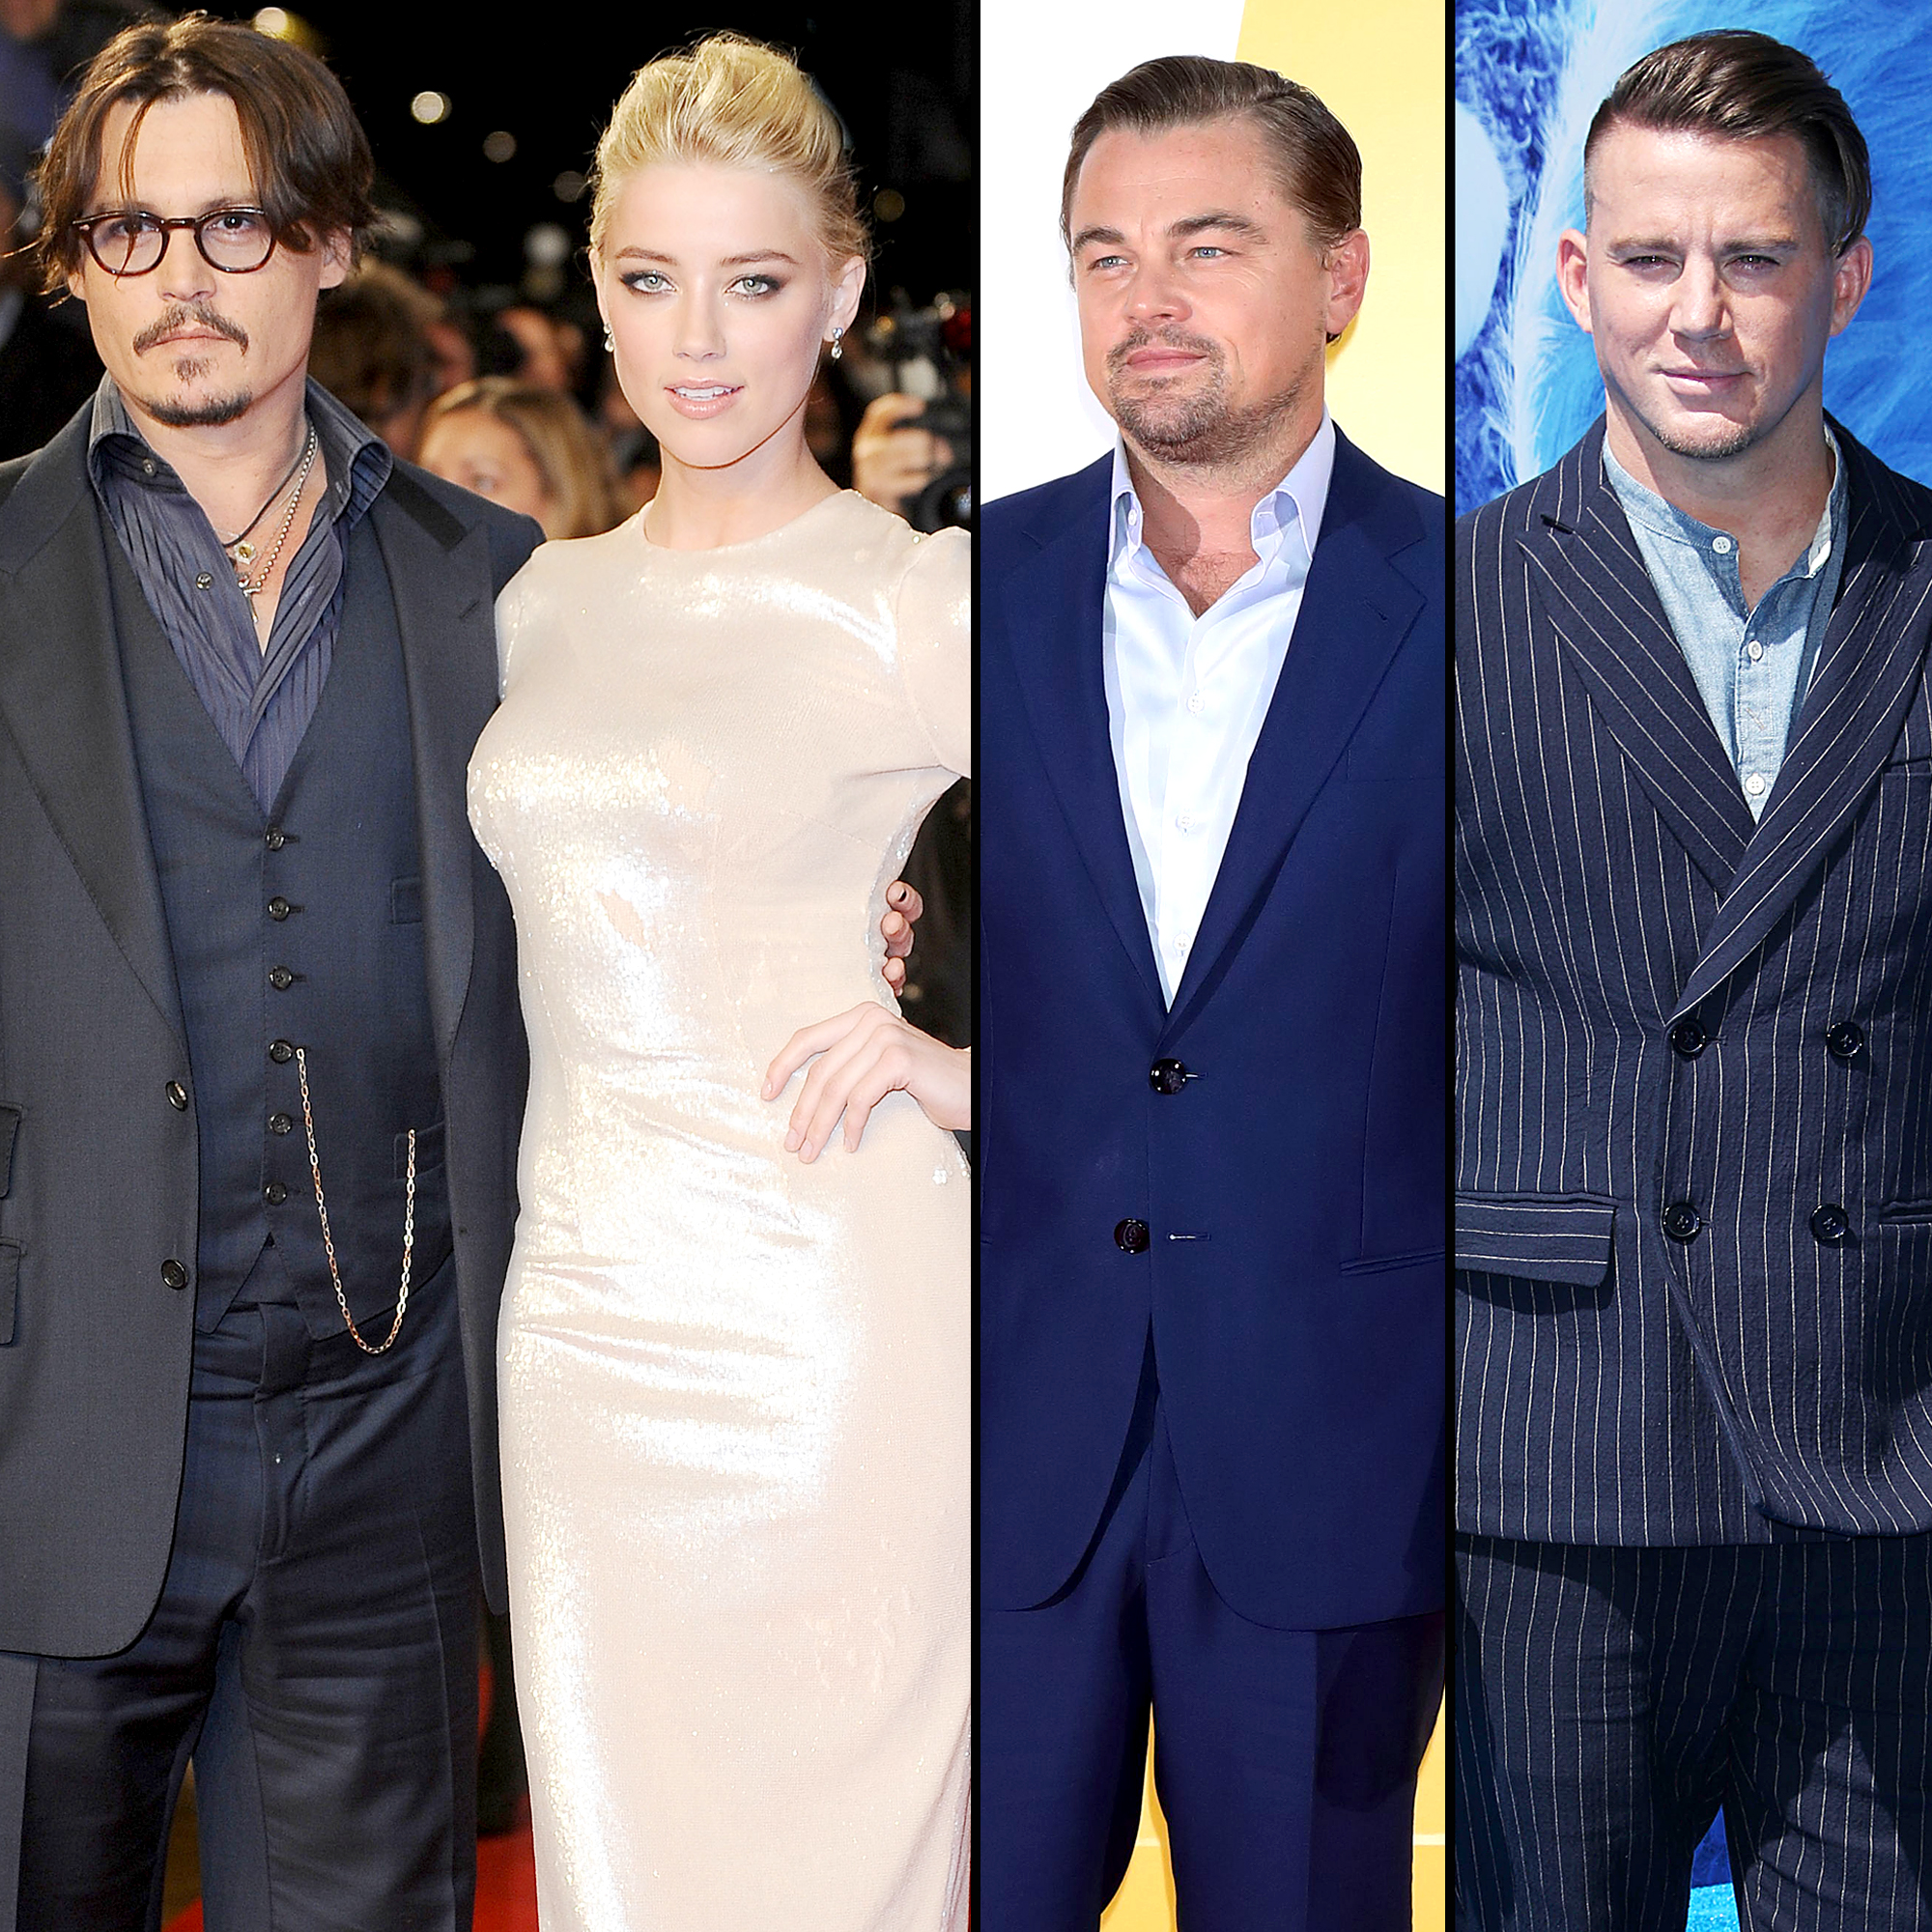 Johnny Depp Claims Amber Heard Cheated With Leo DiCaprio, Others pic